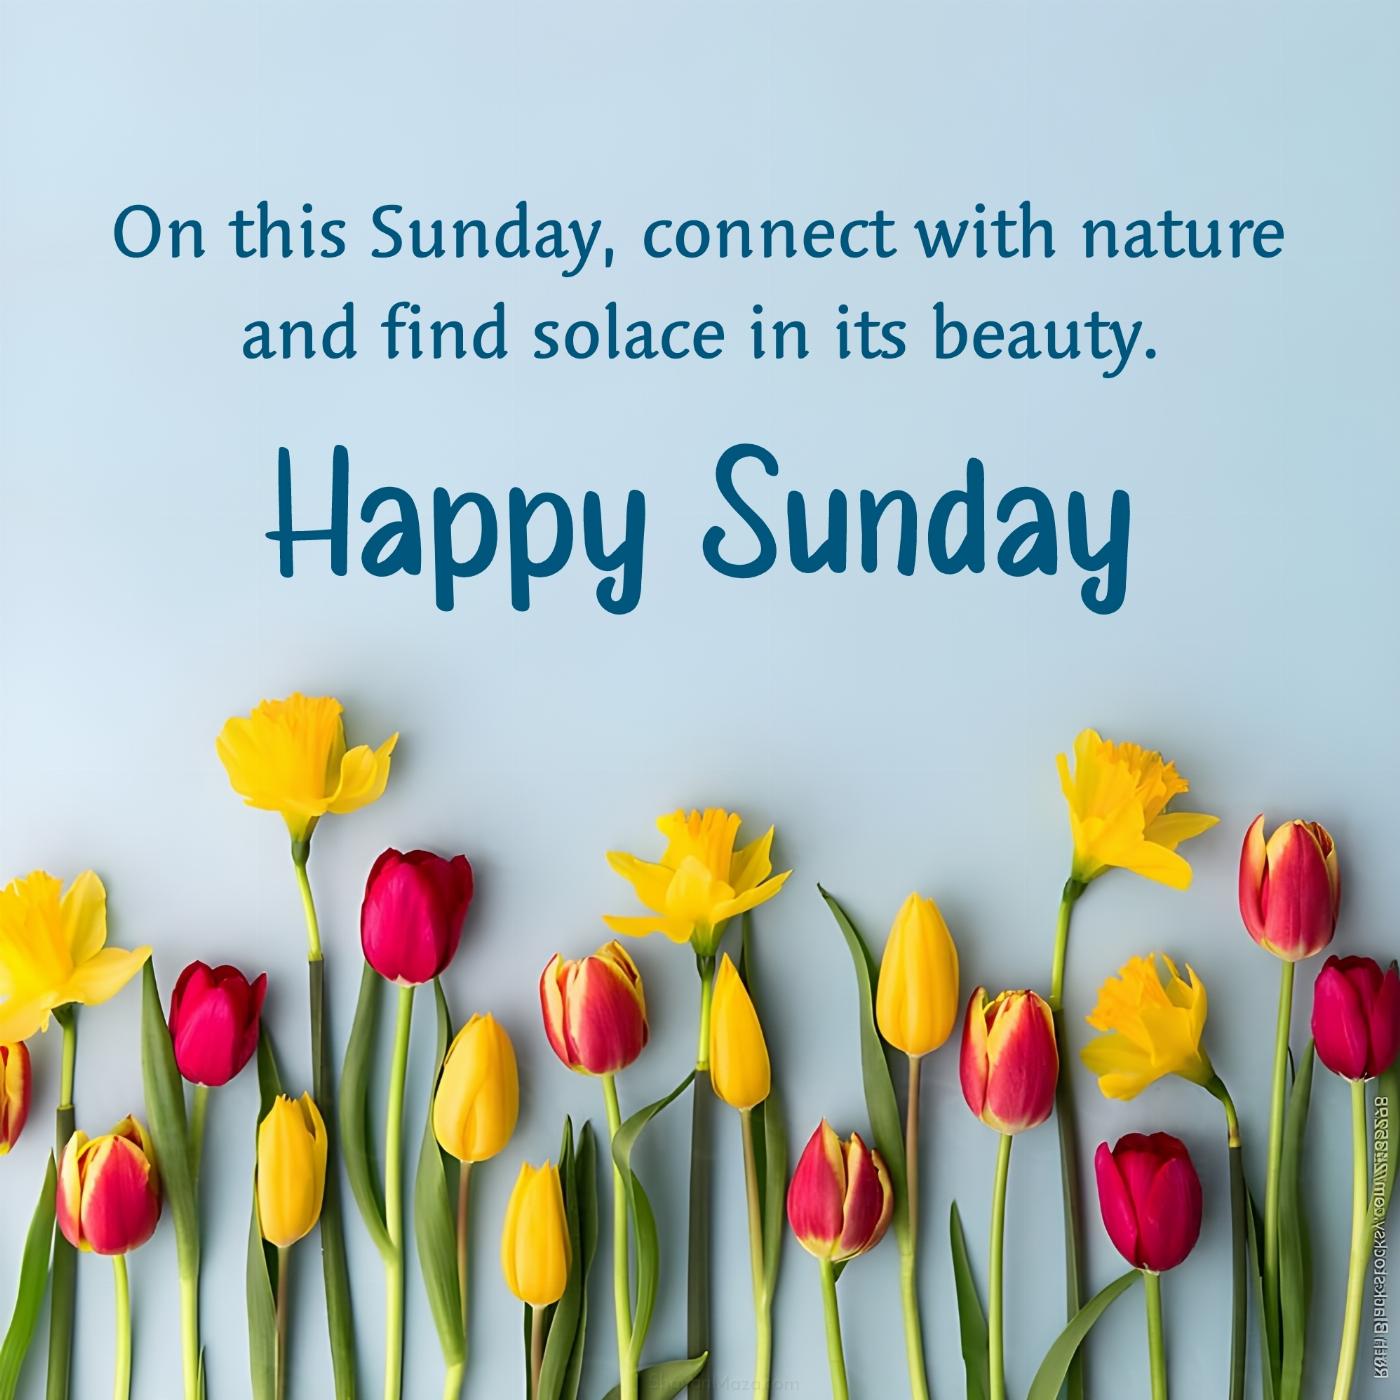 On this Sunday connect with nature and find solace in its beauty